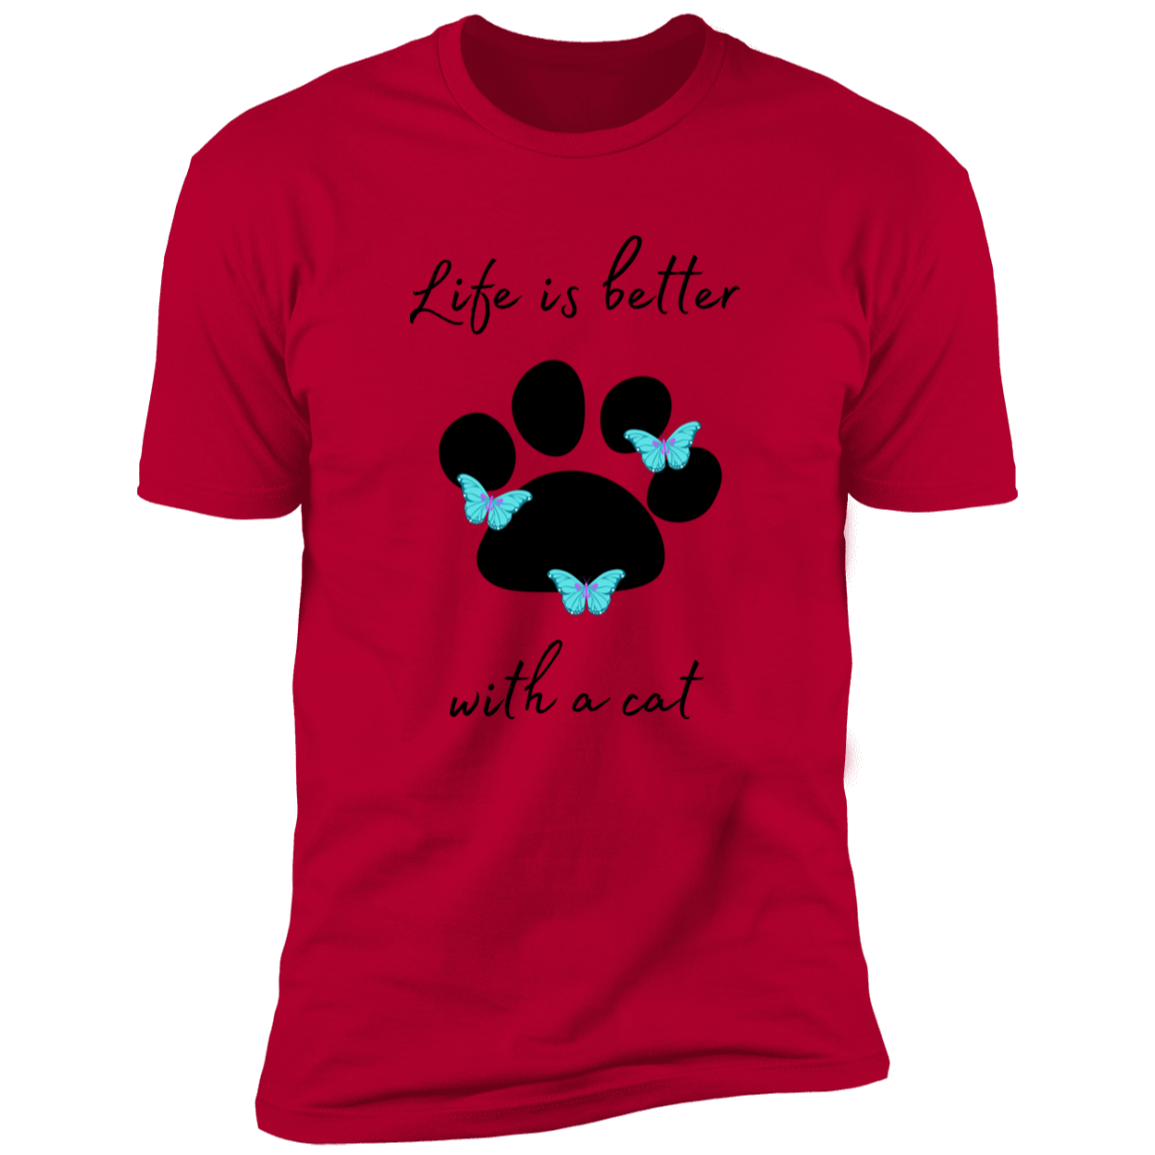 Life is Better with a Cat T-shirt, cat shirt for humans, Cat T-shirt in red